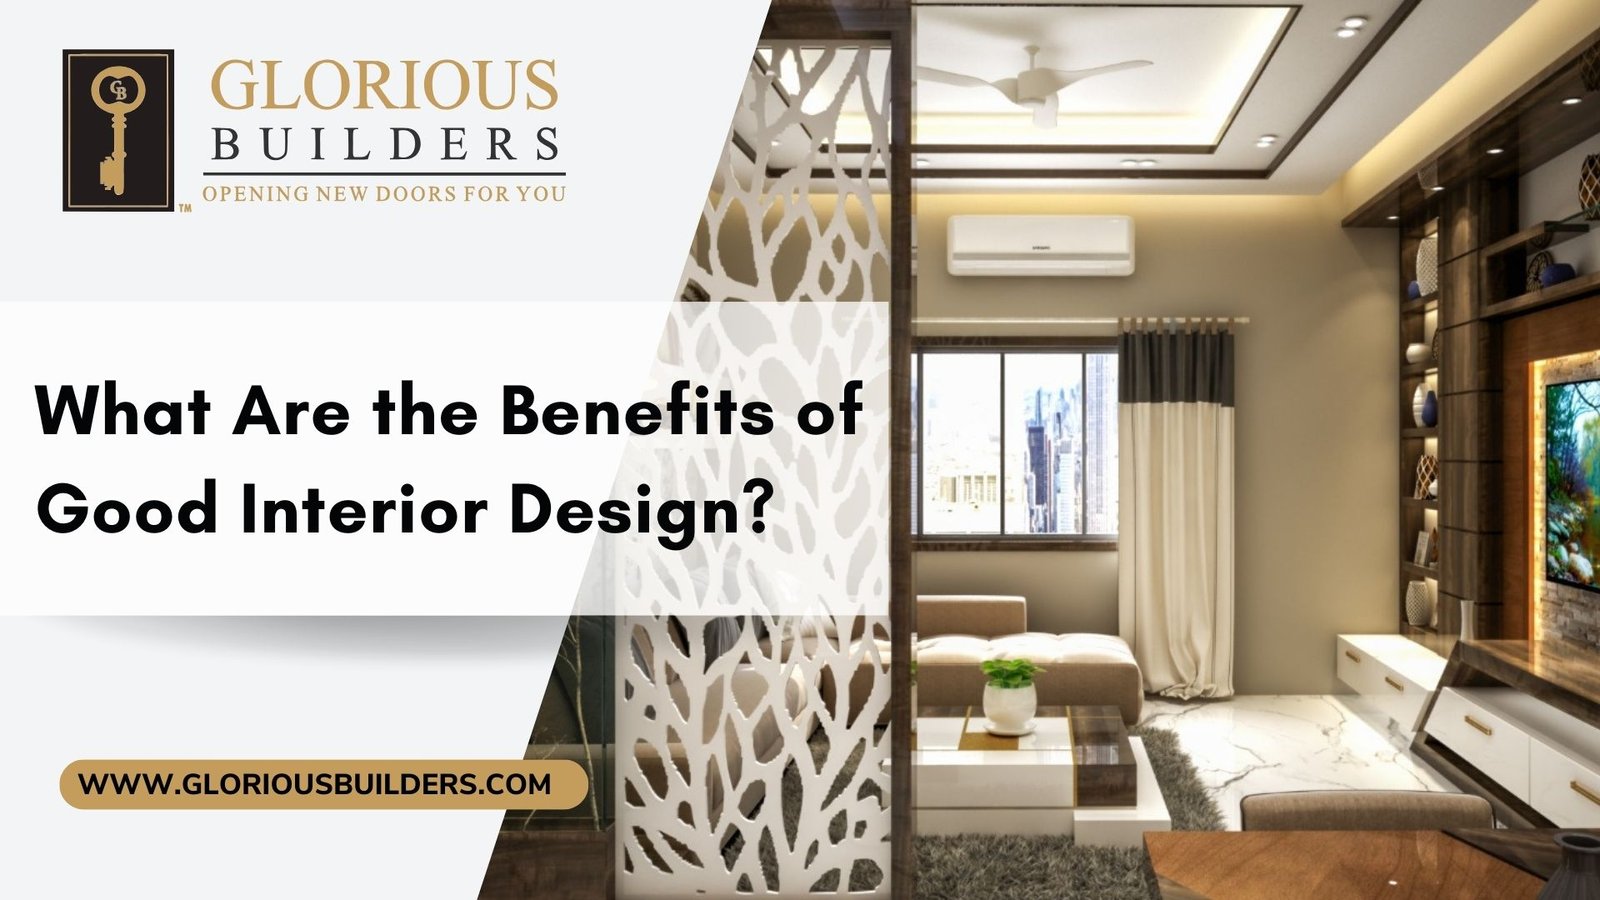 What Are the Benefits of Good Interior Design